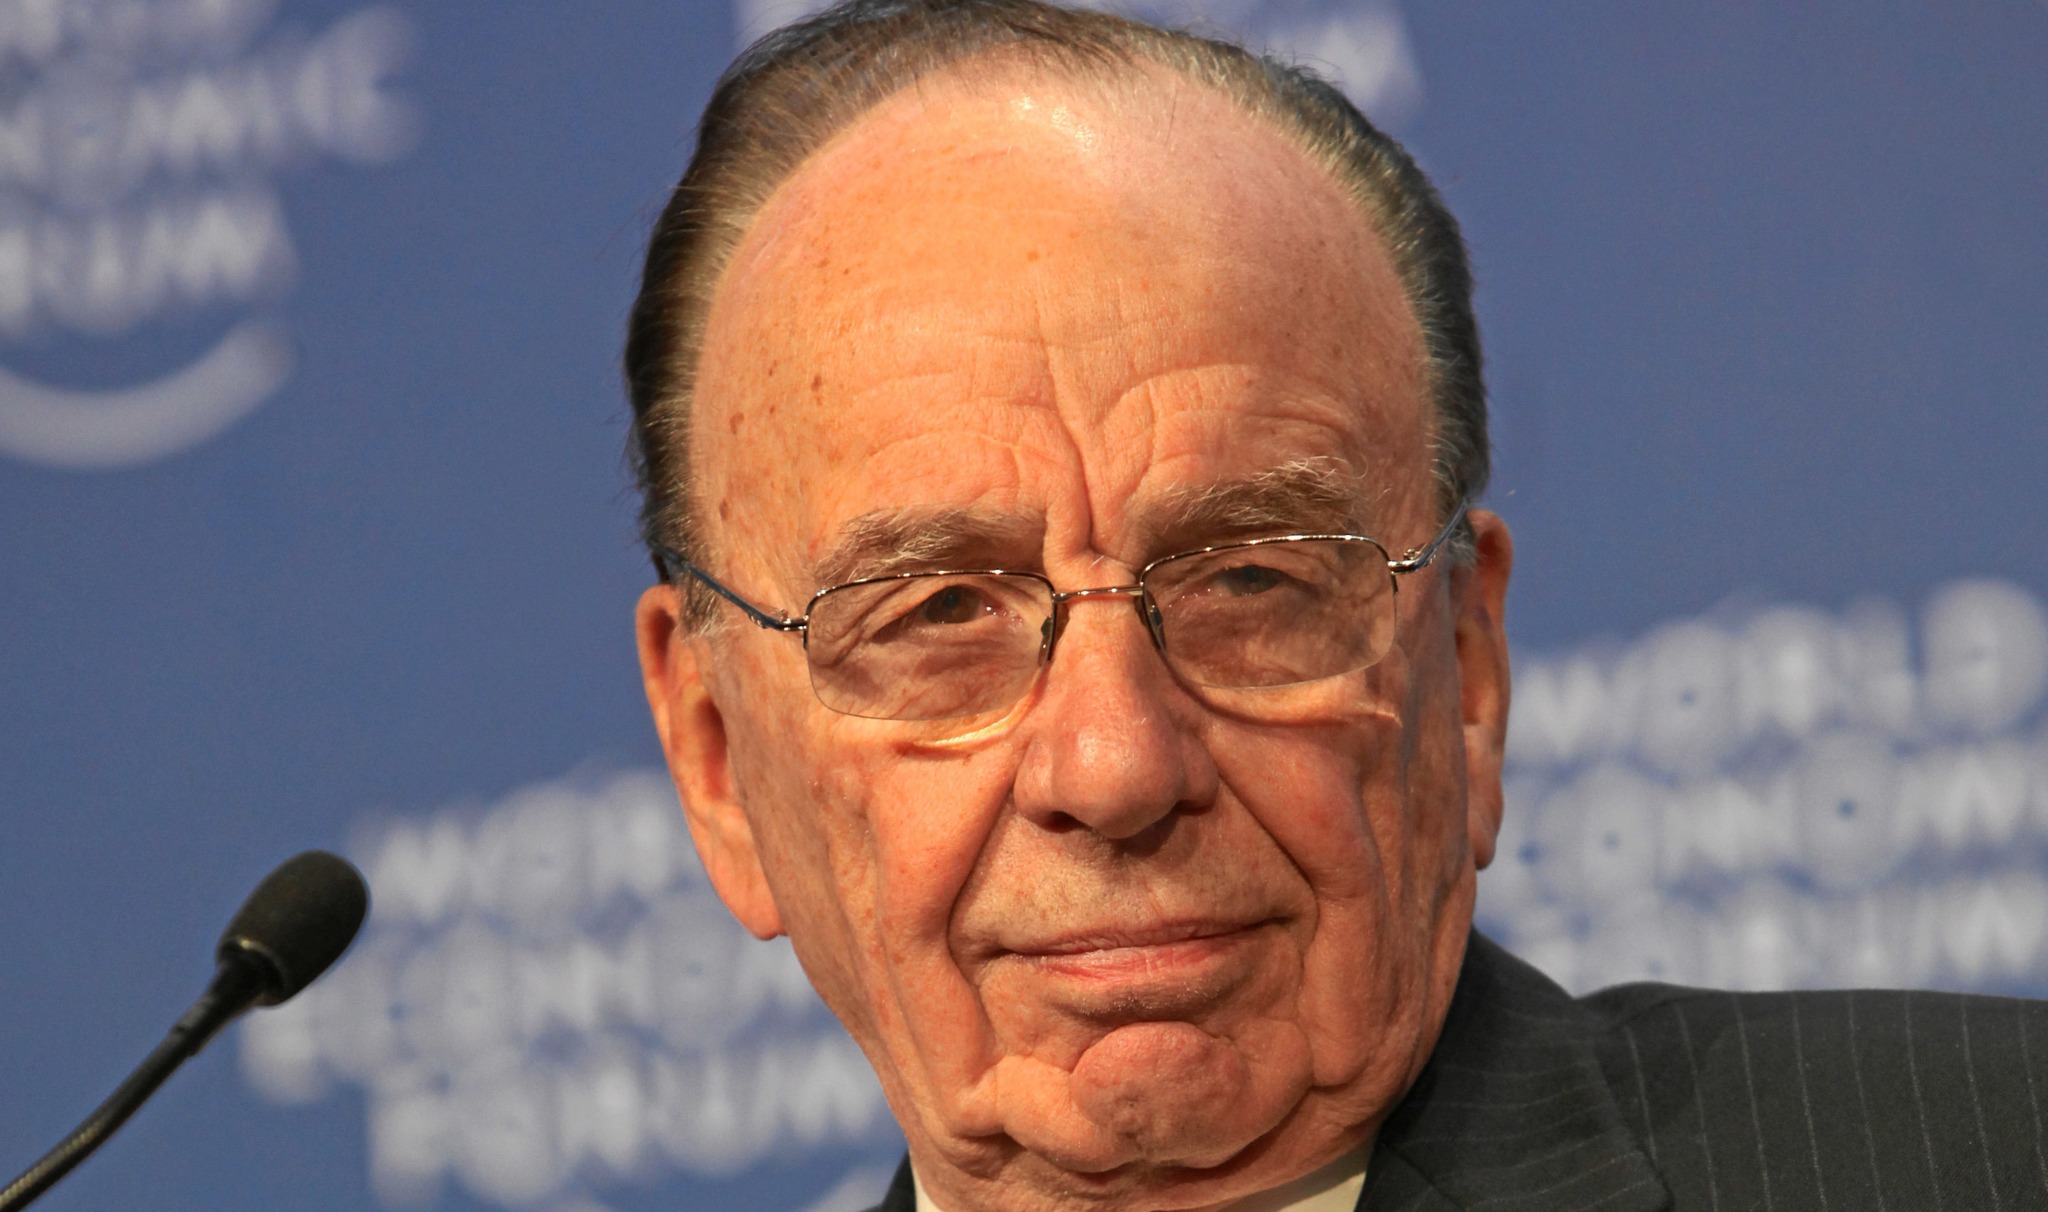 Rupert Murdoch, chairman emeritus of the group that owns The Times, is staunchly pro-Israel. (Photo: WEF / Handout)